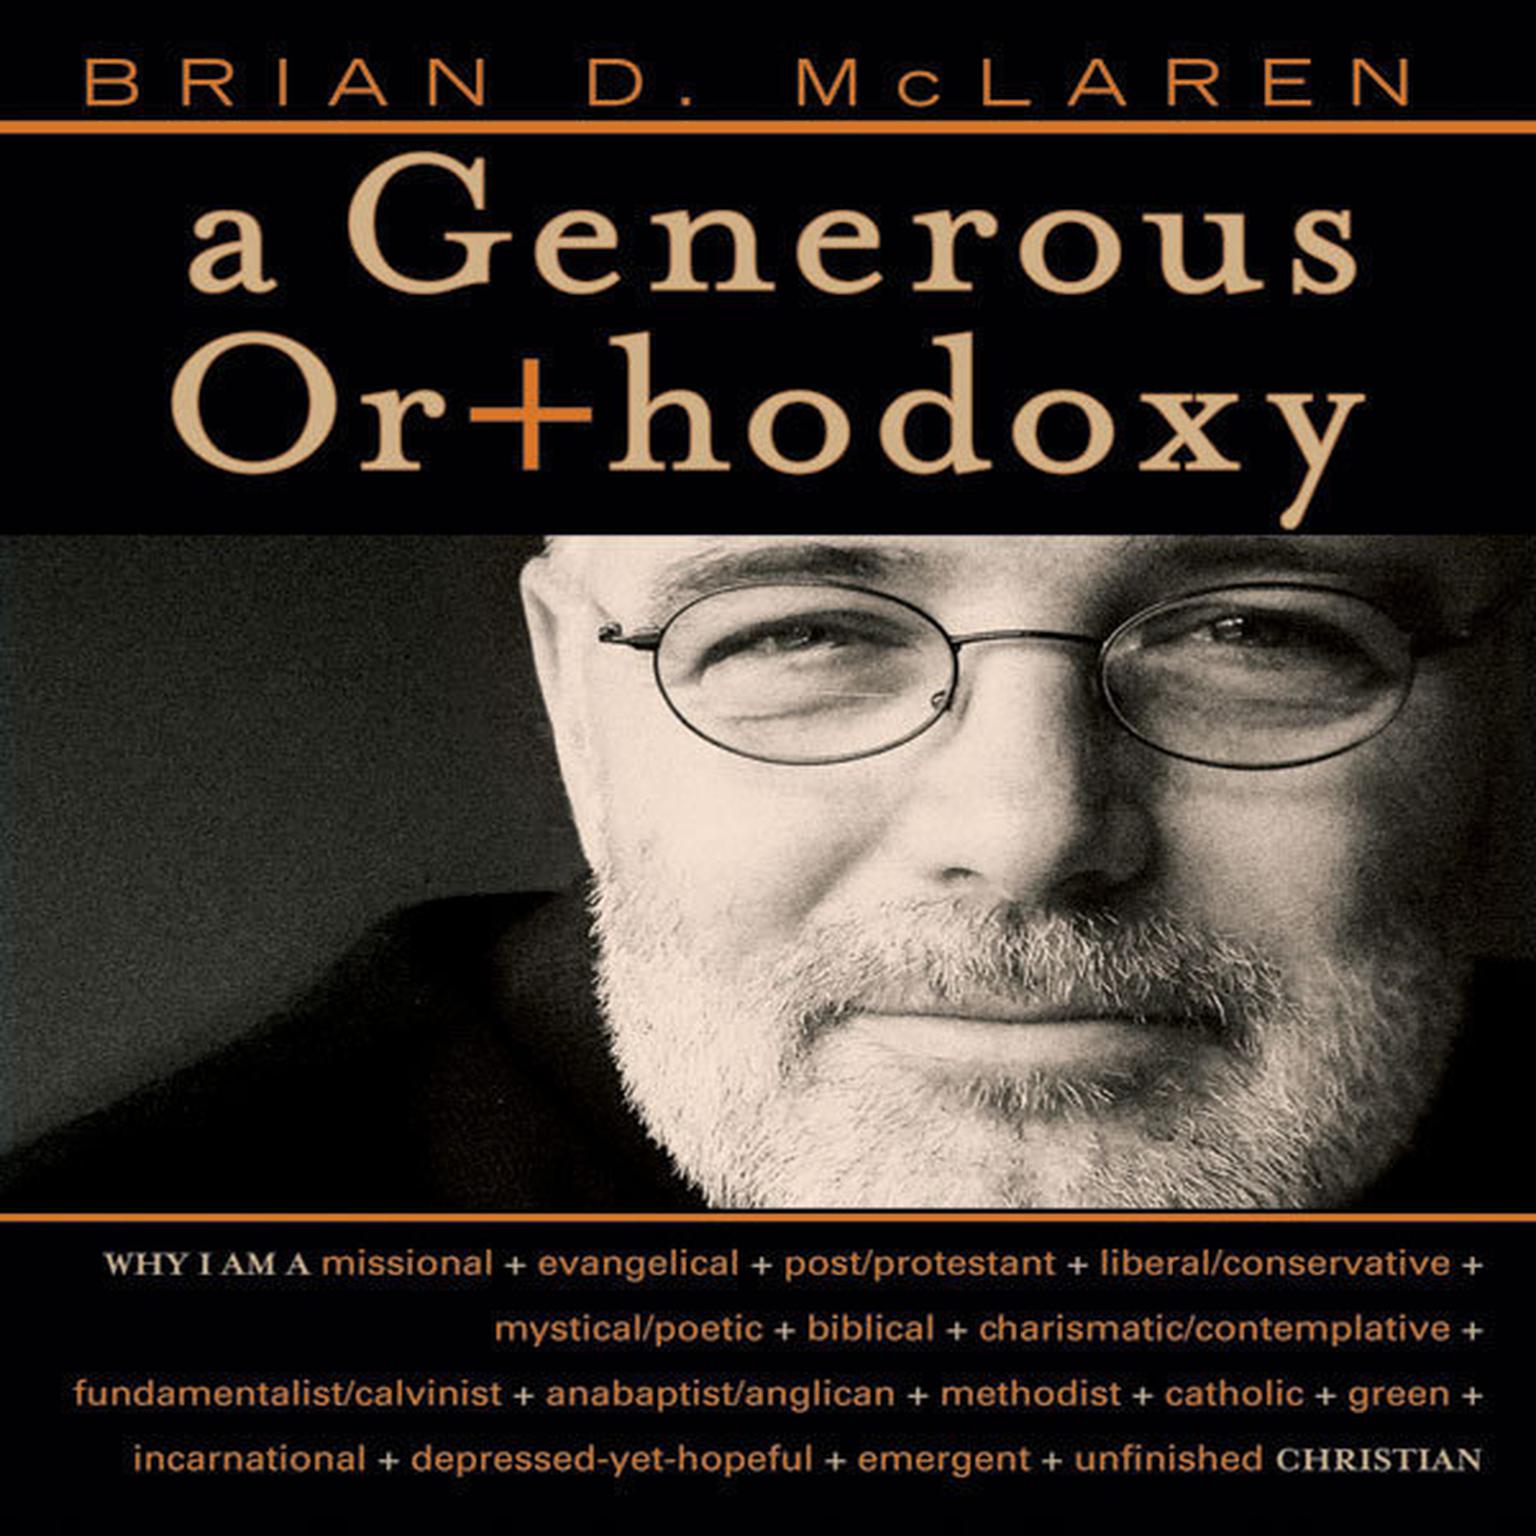 A Generous Orthodoxy (Abridged): Why I am a missional, evangelical, post/protestant, liberal/conservative, biblical, charismatic/contemplative, fundamentalist/calvinist, anabaptist/anglican, incarnational, depressed-yet-hopeful, emergent, unfinished Christian Audiobook, by Brian D. McLaren